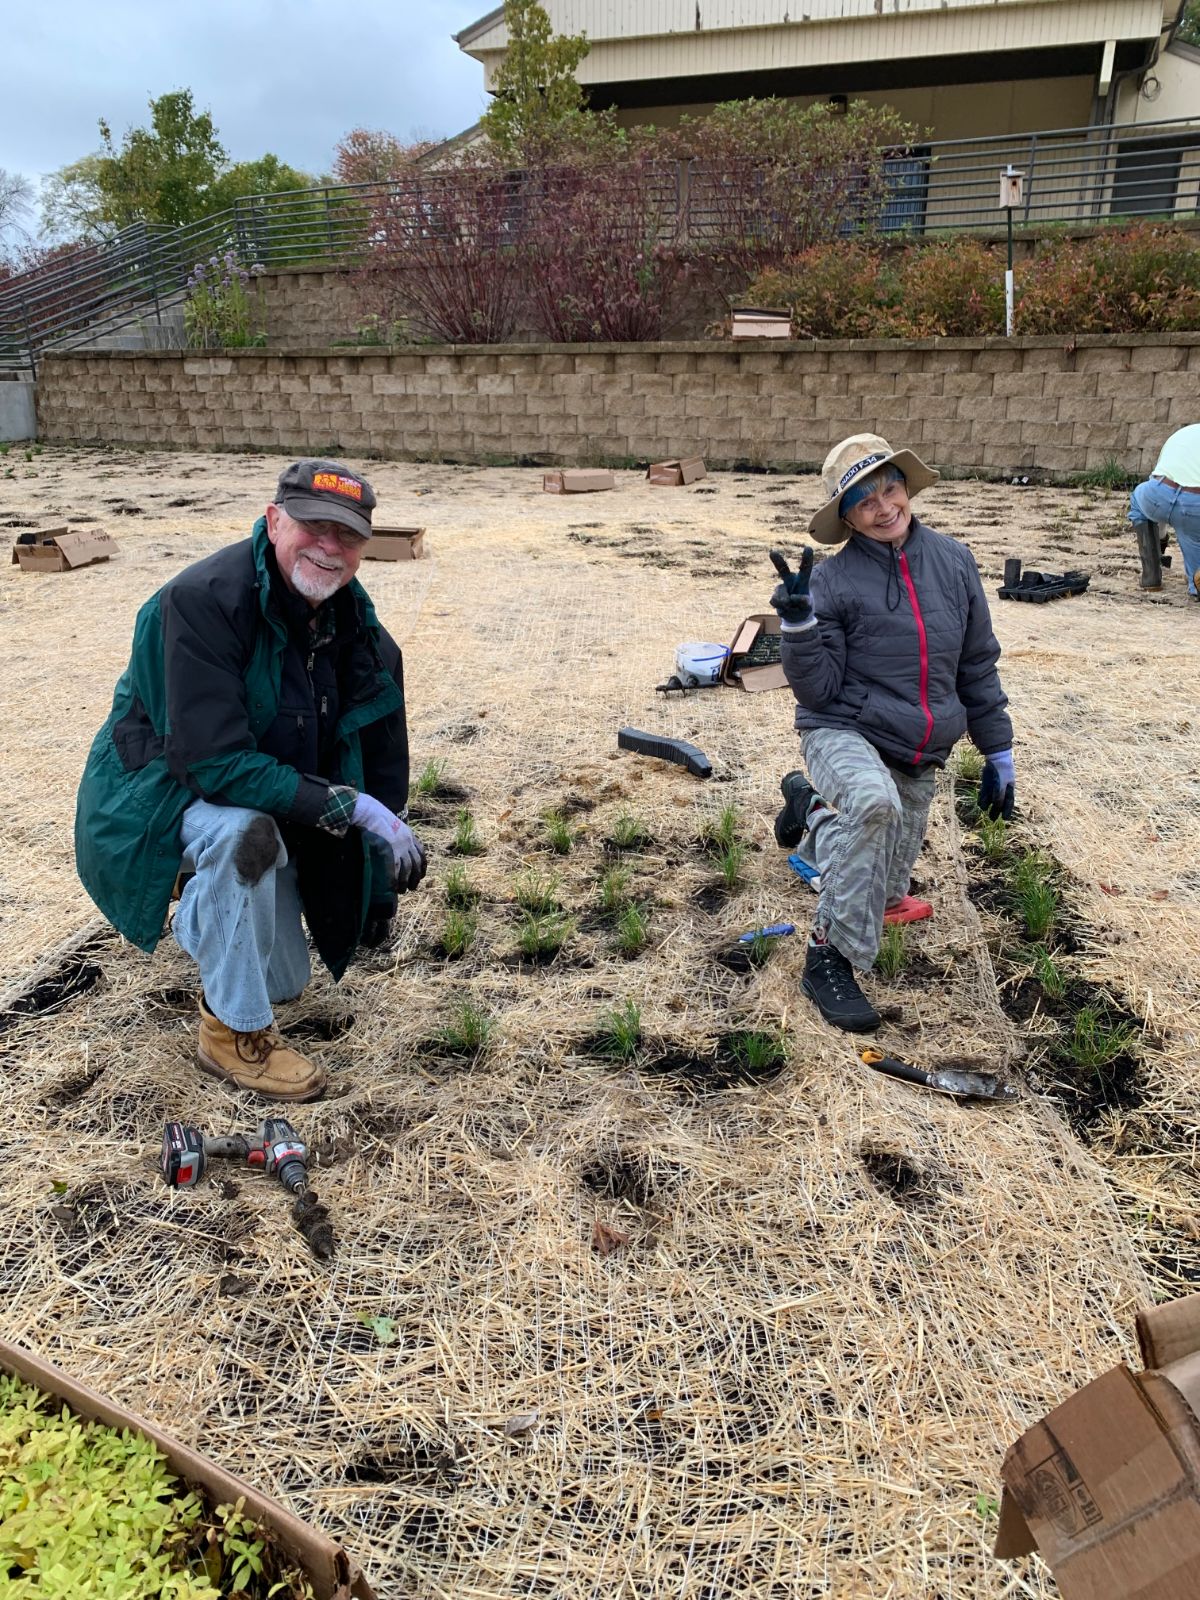 Bruce & Mimi working on a project with the Whitefish Bay Garden Club. Planting native plantings to curb runoff and attract pollinators.